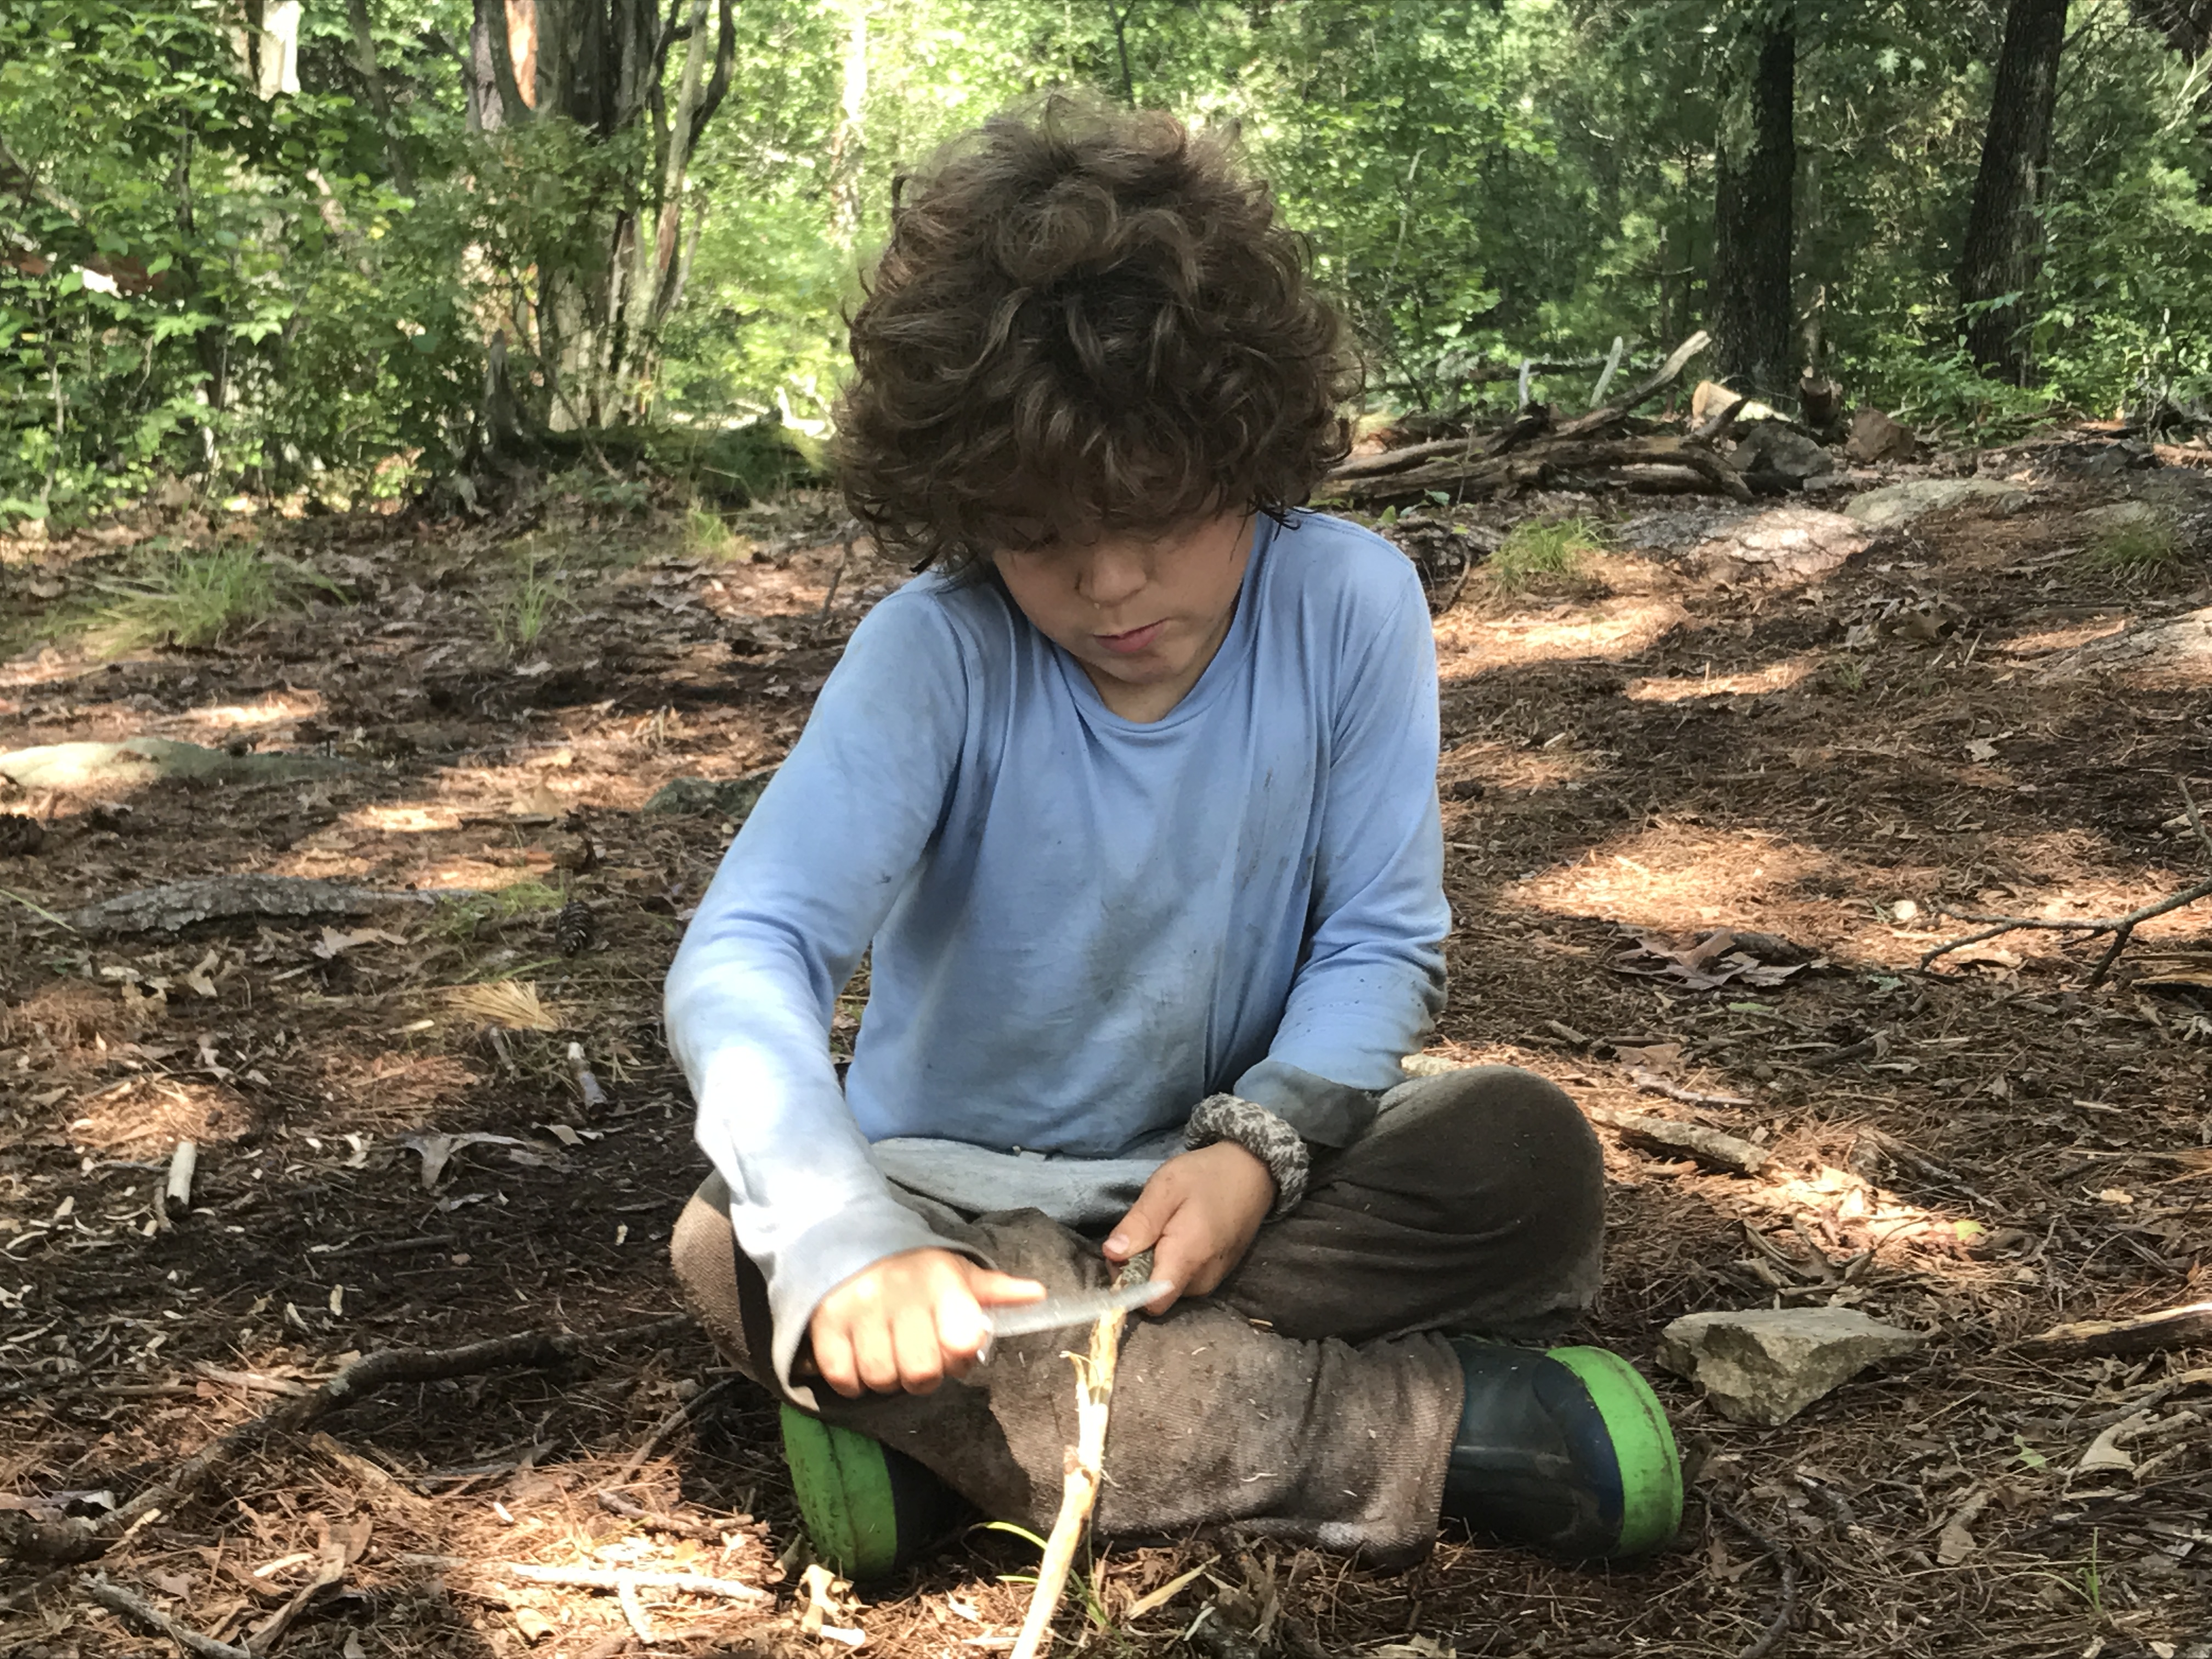 Whittling with knives to learn persistence and patience